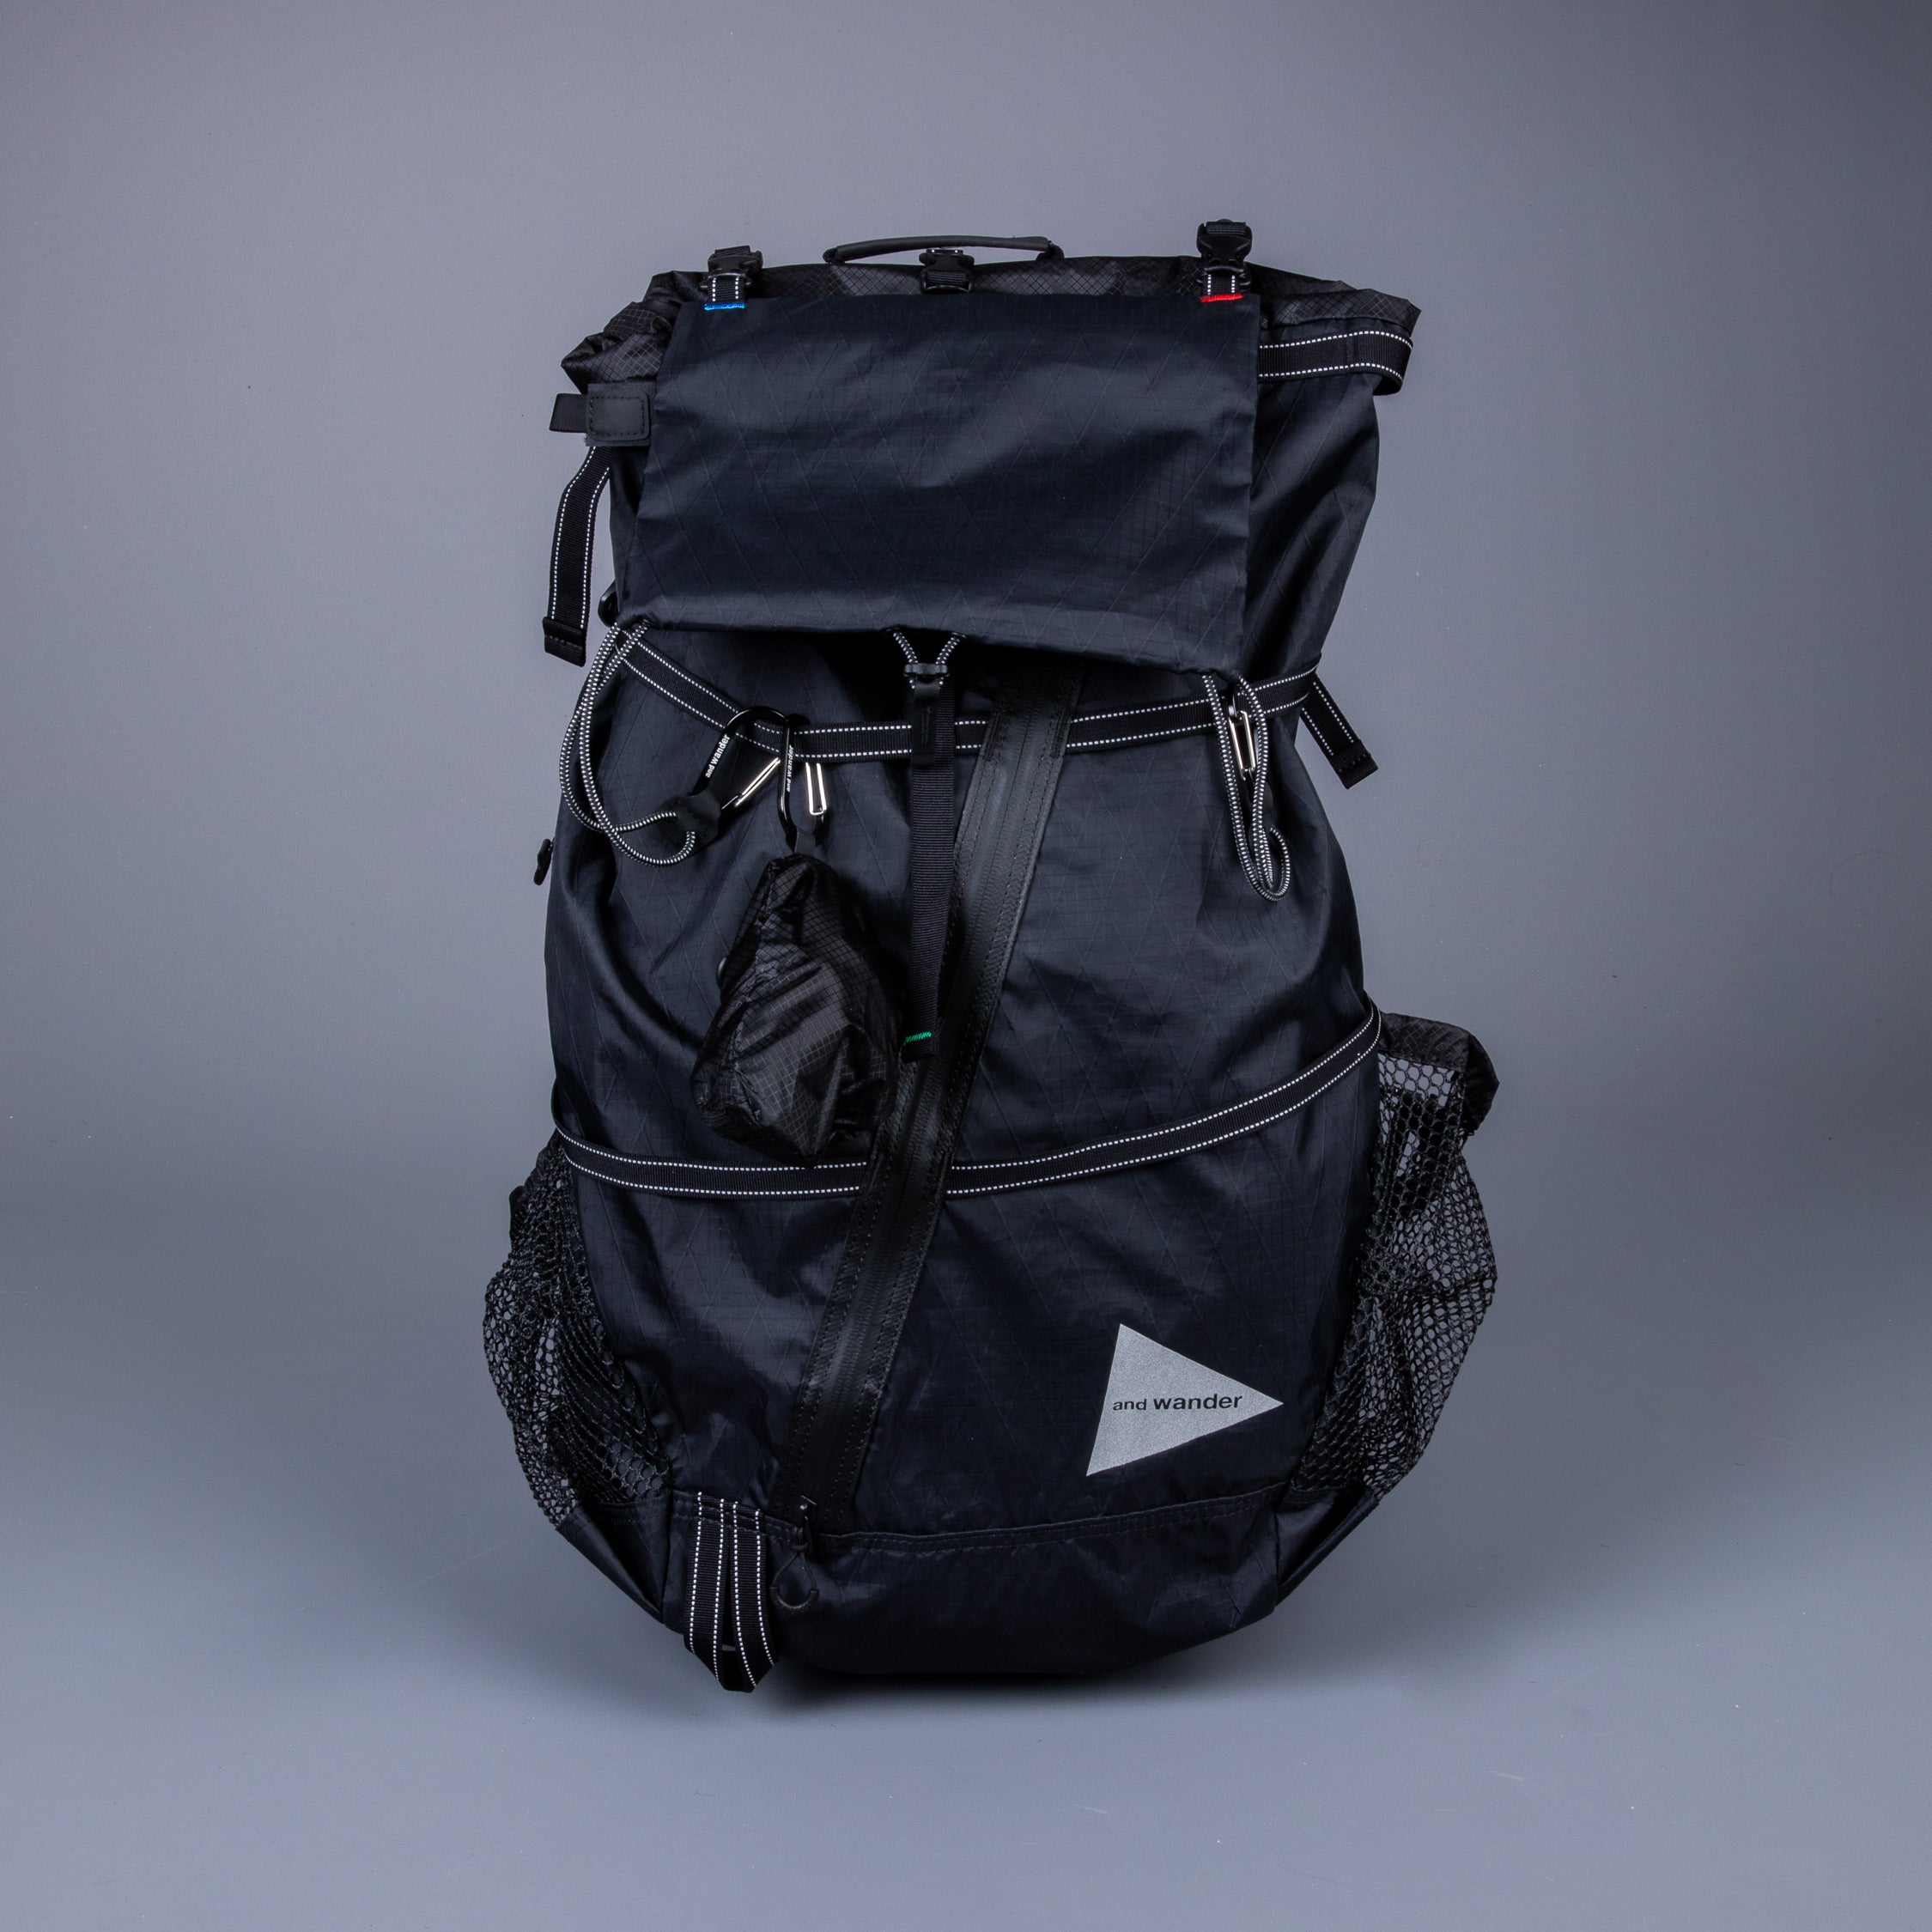 and wander 20L X-Pac Backpack - Black